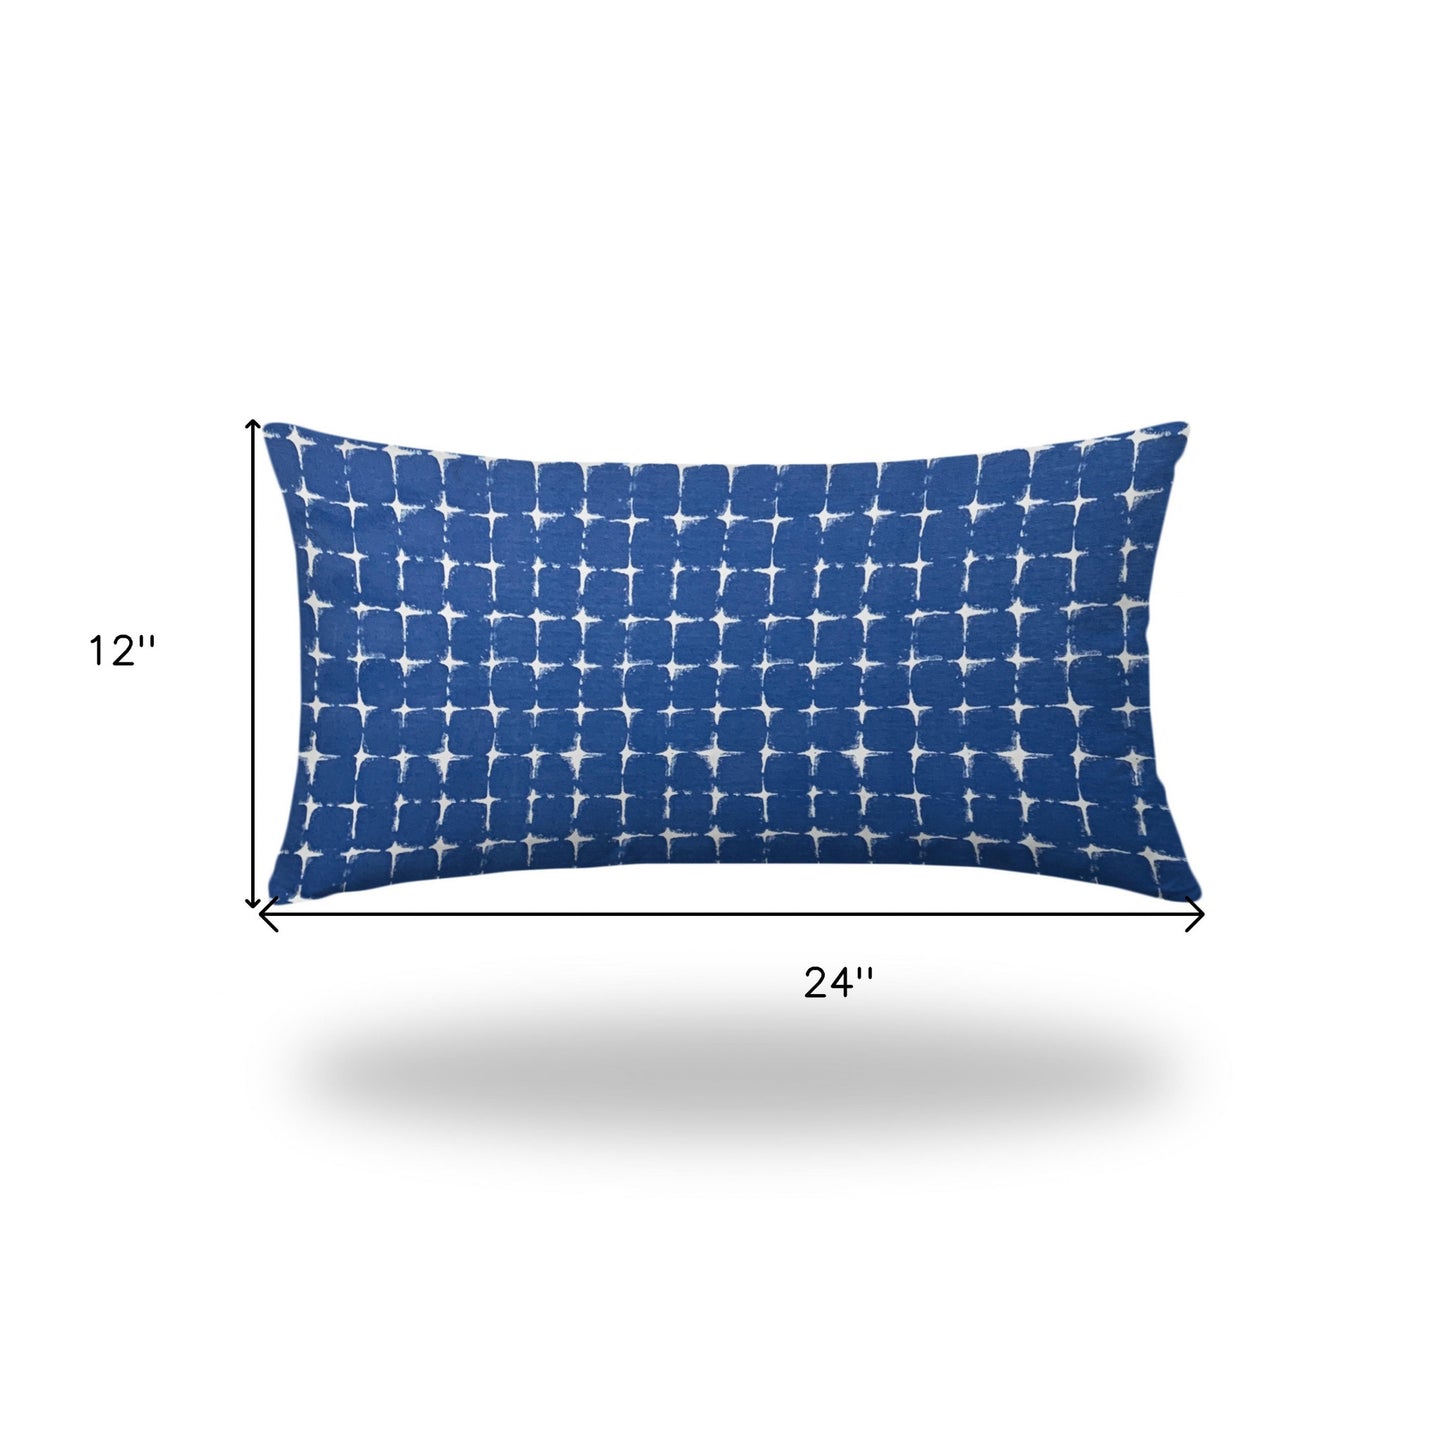 14" X 24" Blue And White Enveloped Abstract Lumbar Indoor Outdoor Pillow Cover